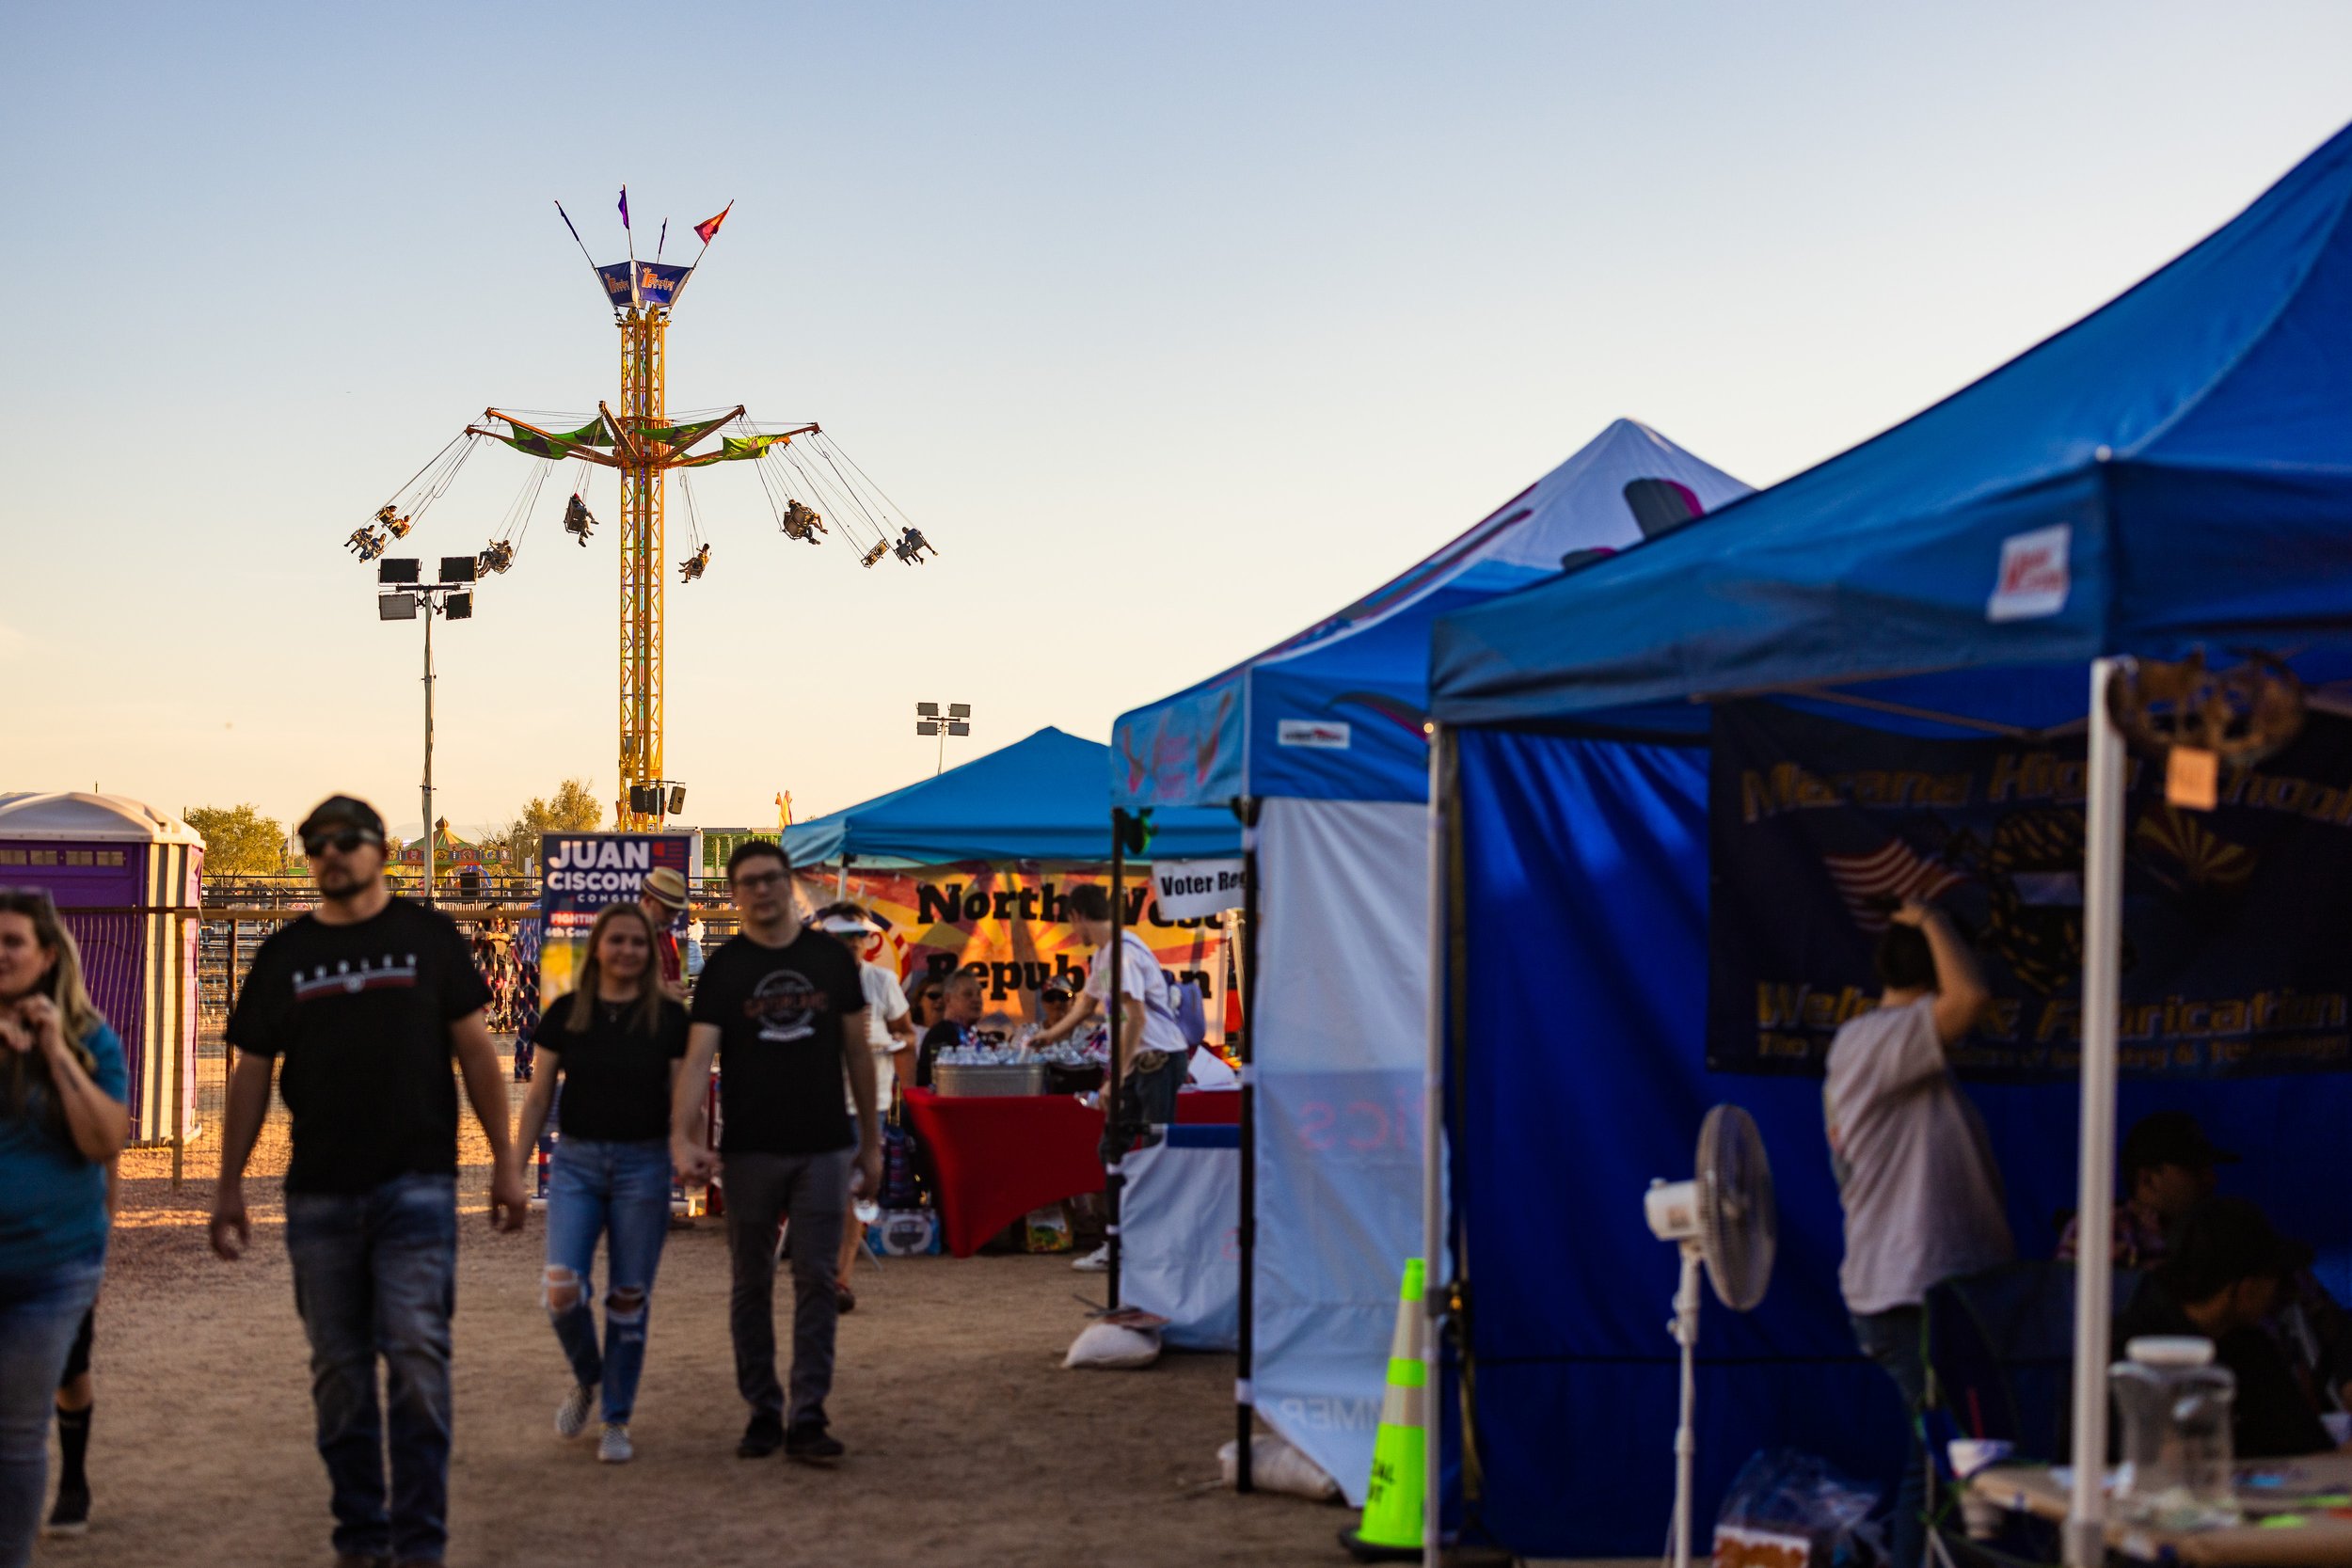  Vendors and carnival rides 